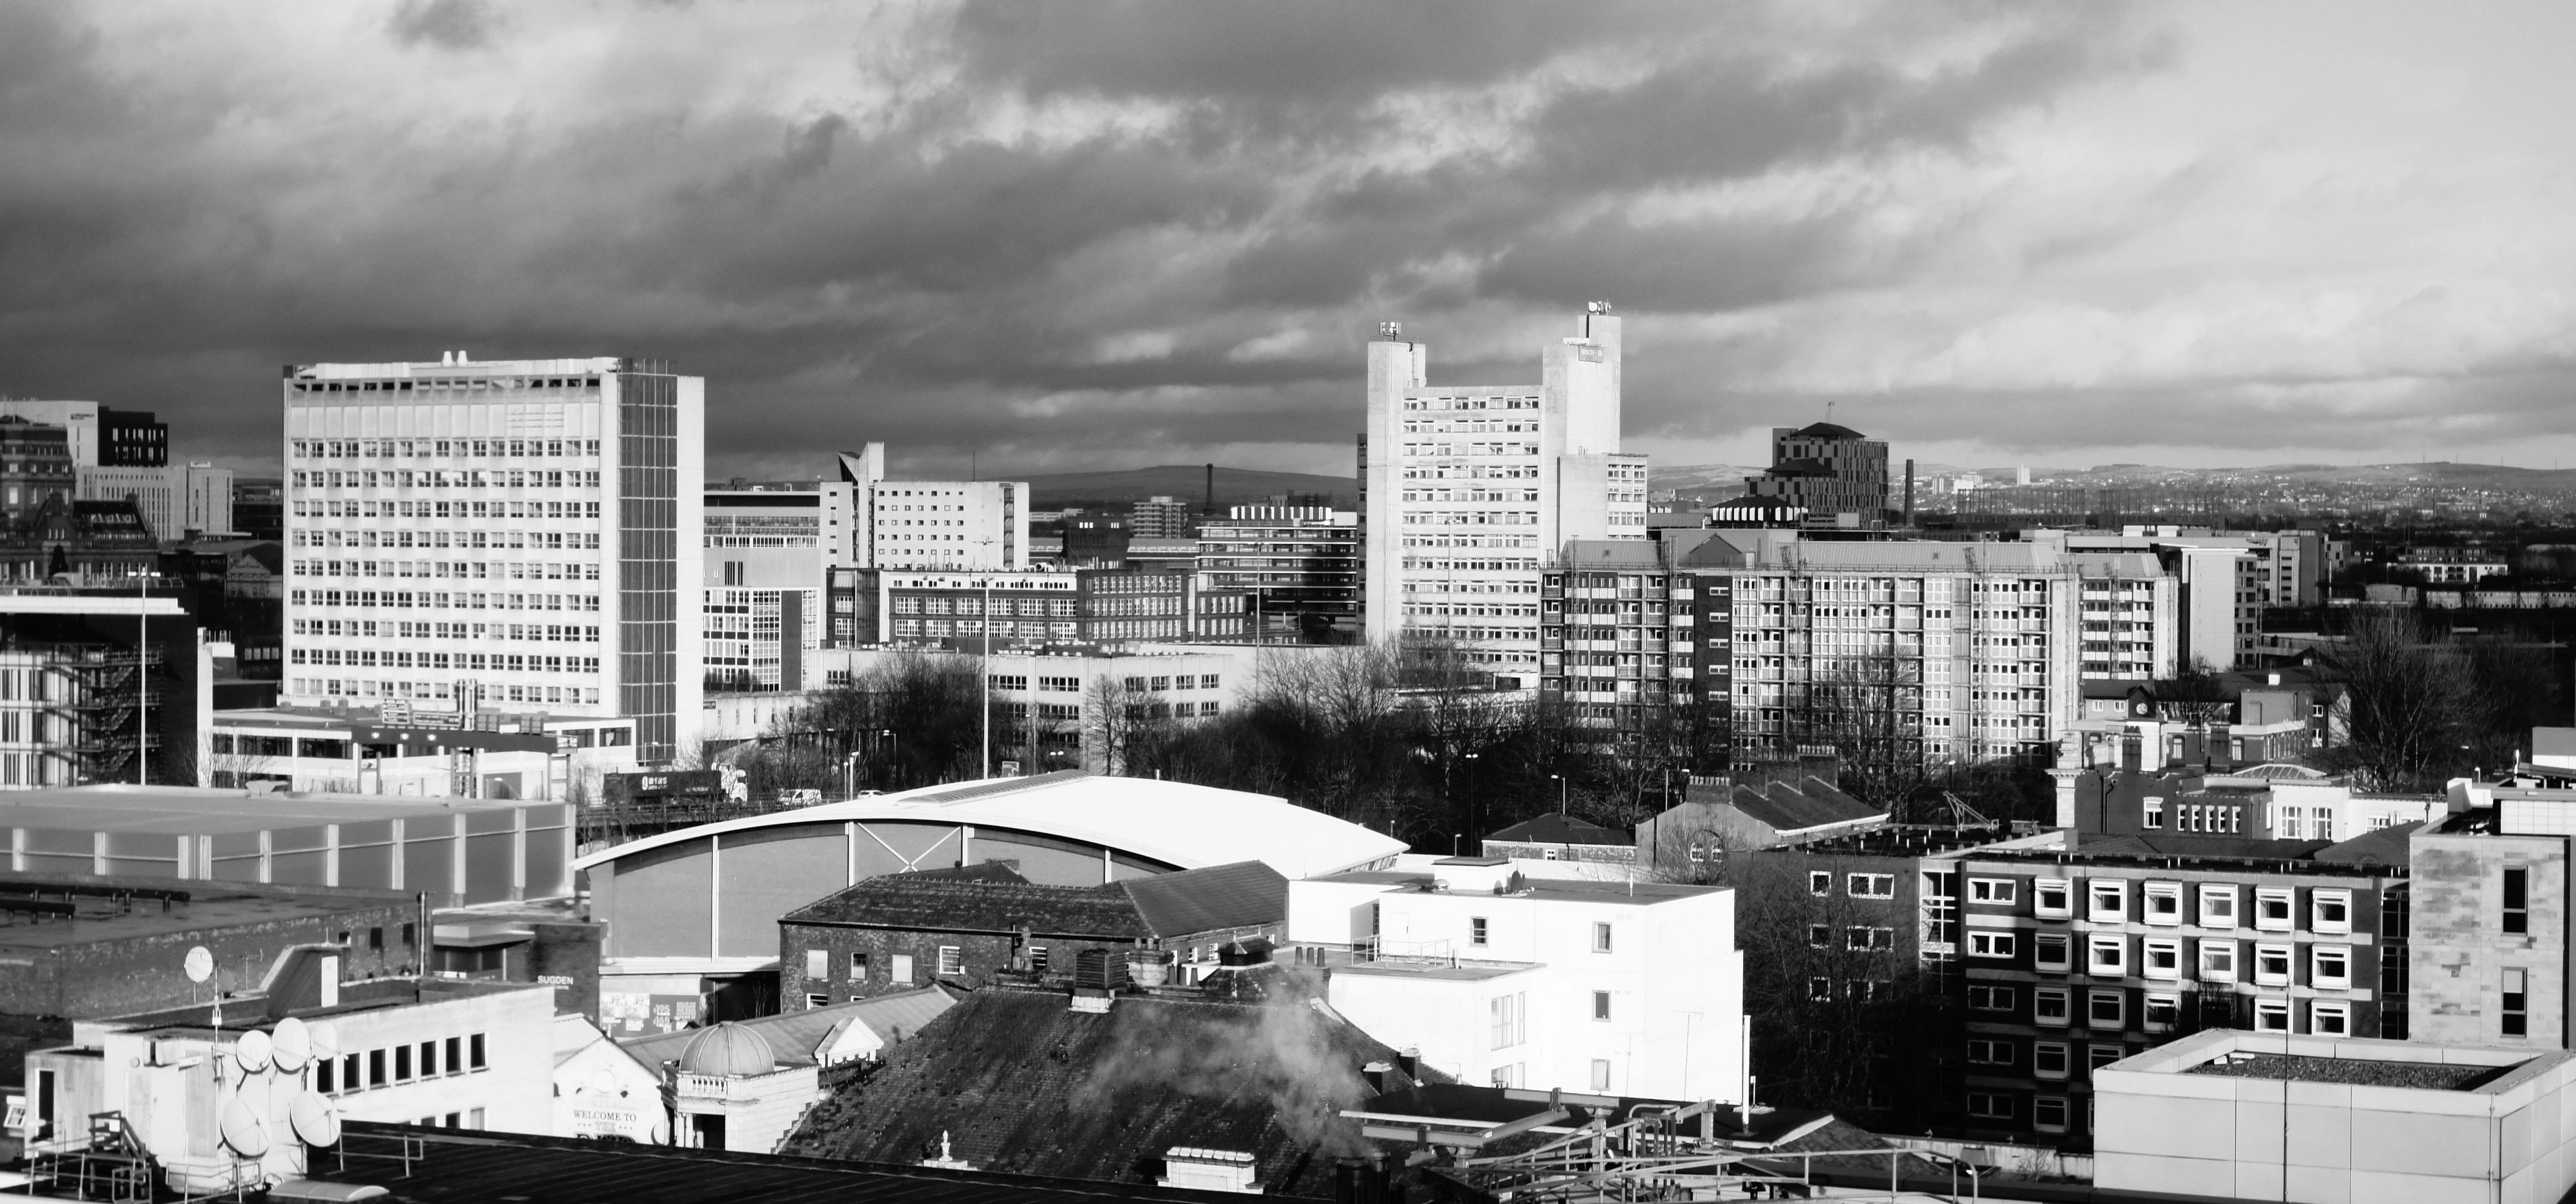 Manchester city view from Chatham tower with dramatic sky